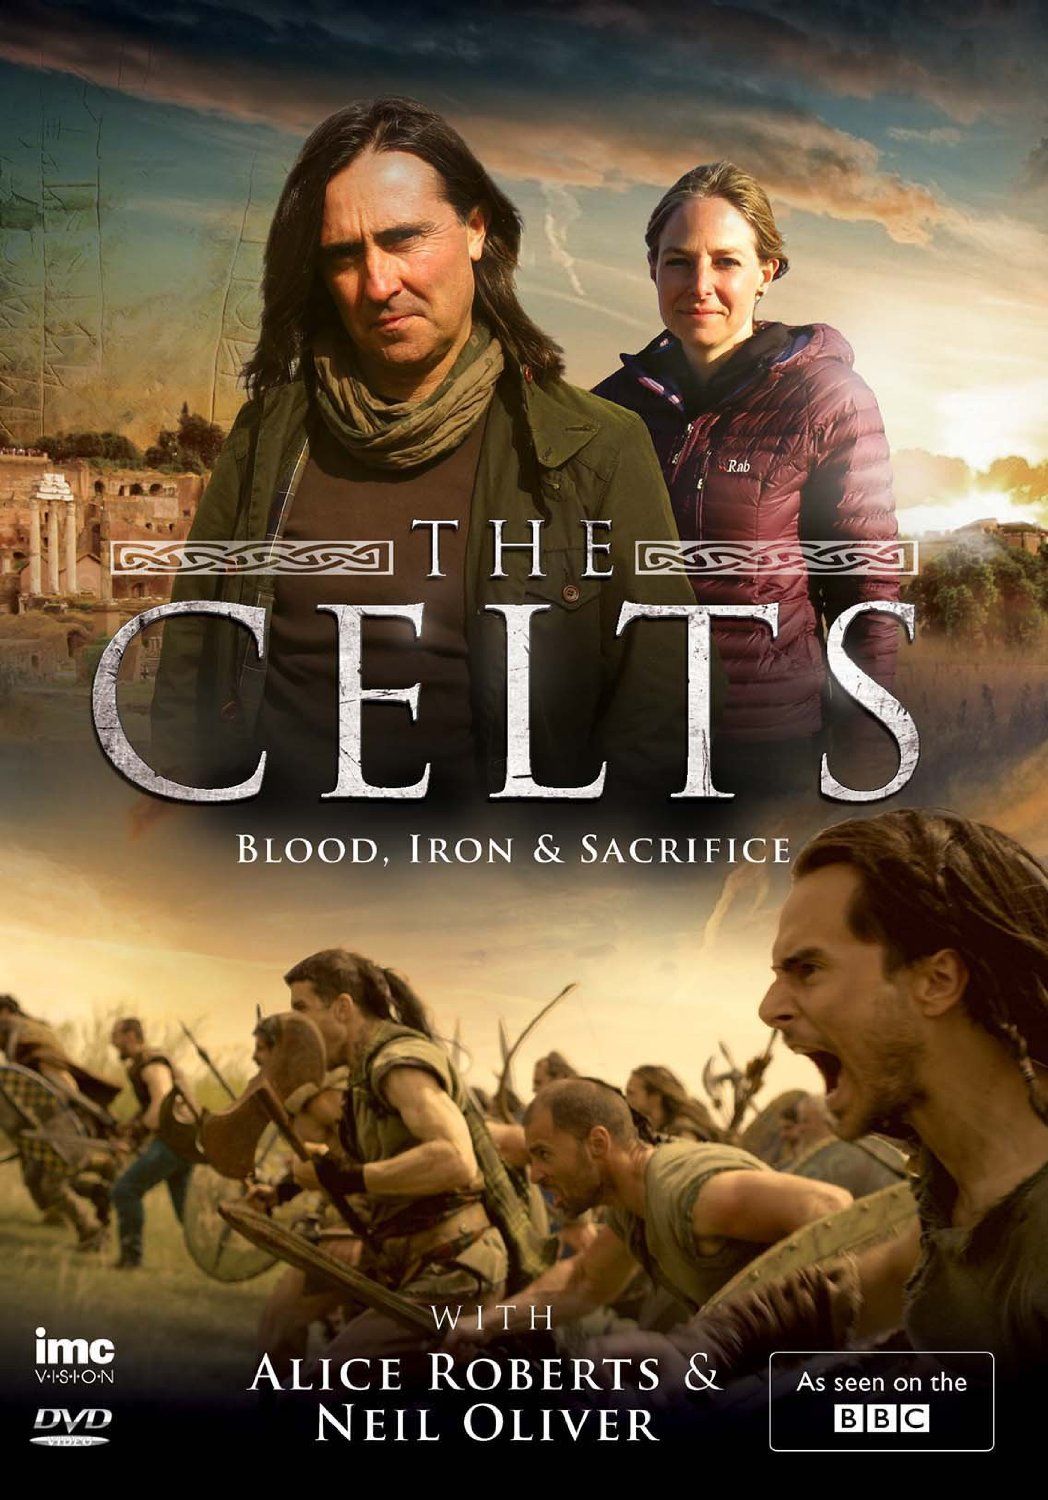 The Celts: Blood, Iron and Sacrifice with Alice Roberts and Neil Oliver ne zaman